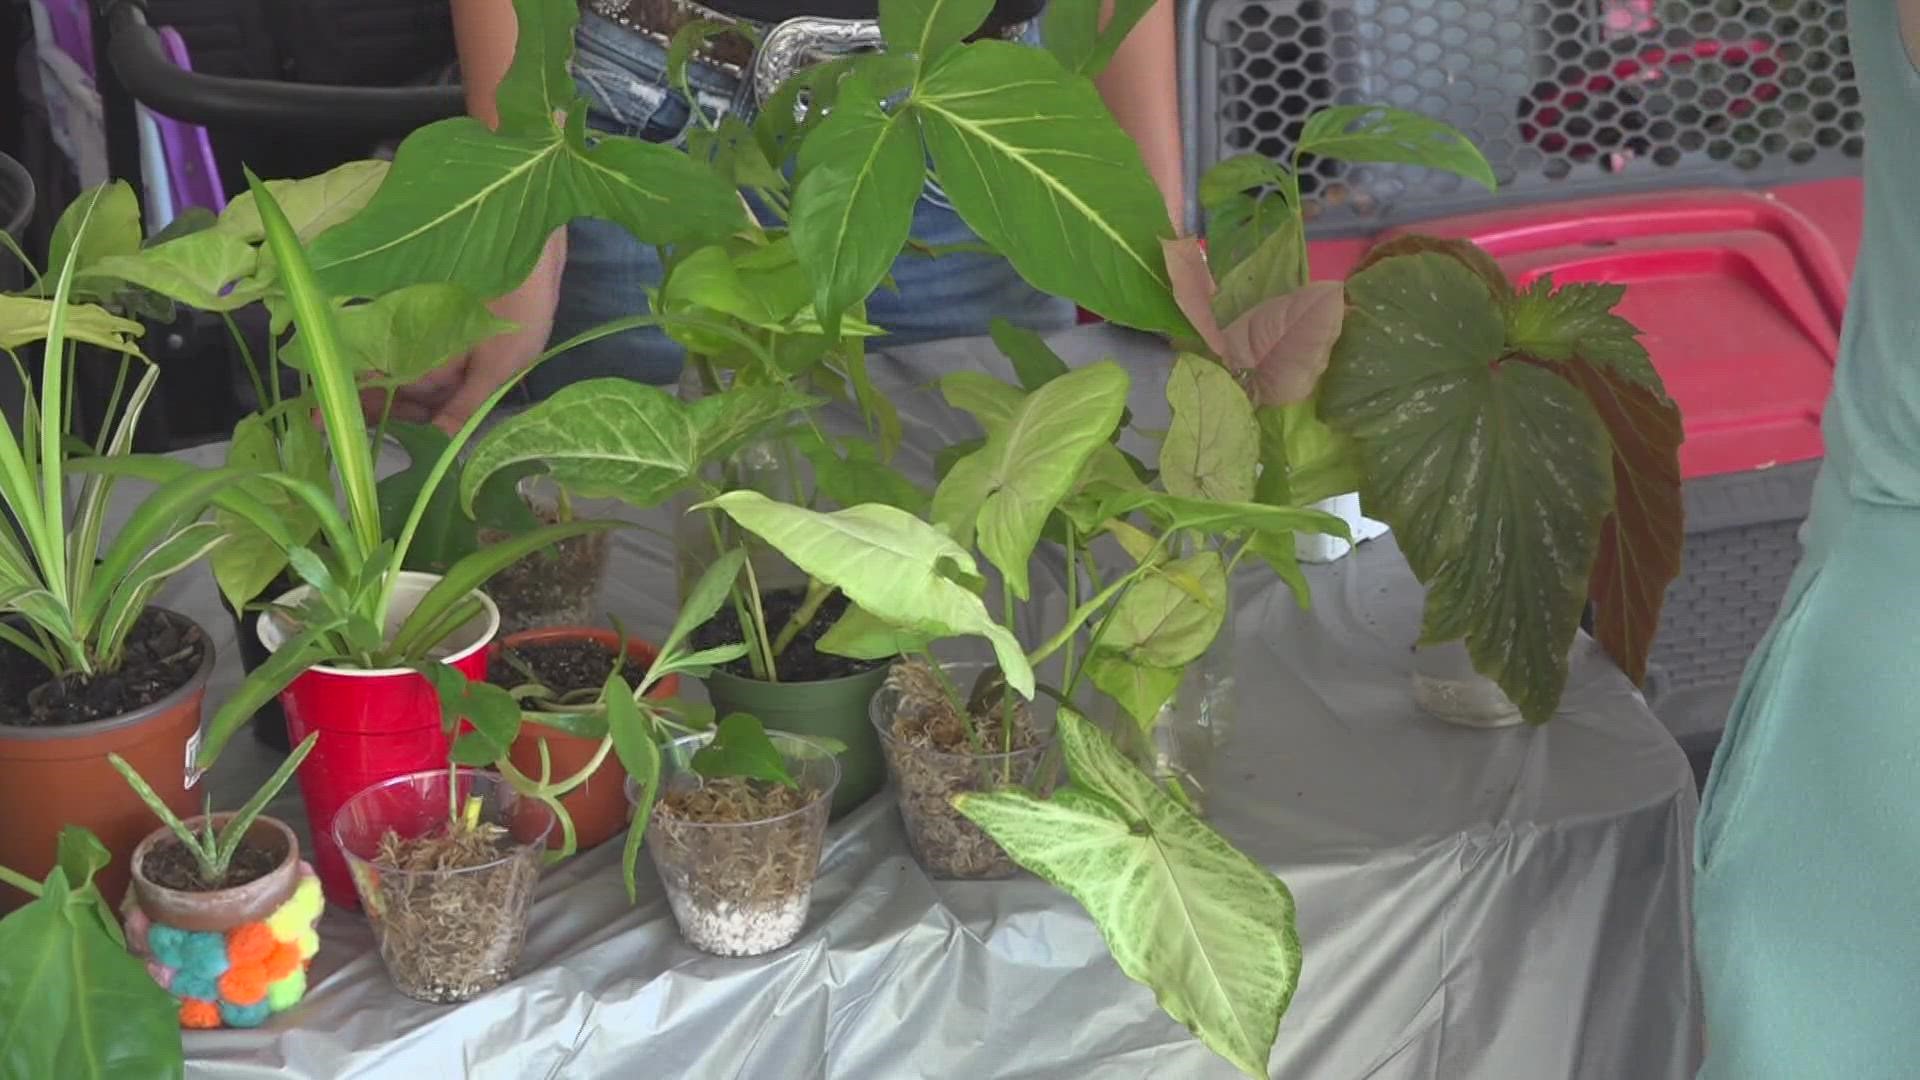 A local Waco Facebook group hosted a plant swap on Sunday and reflected on the struggles of summer drought.